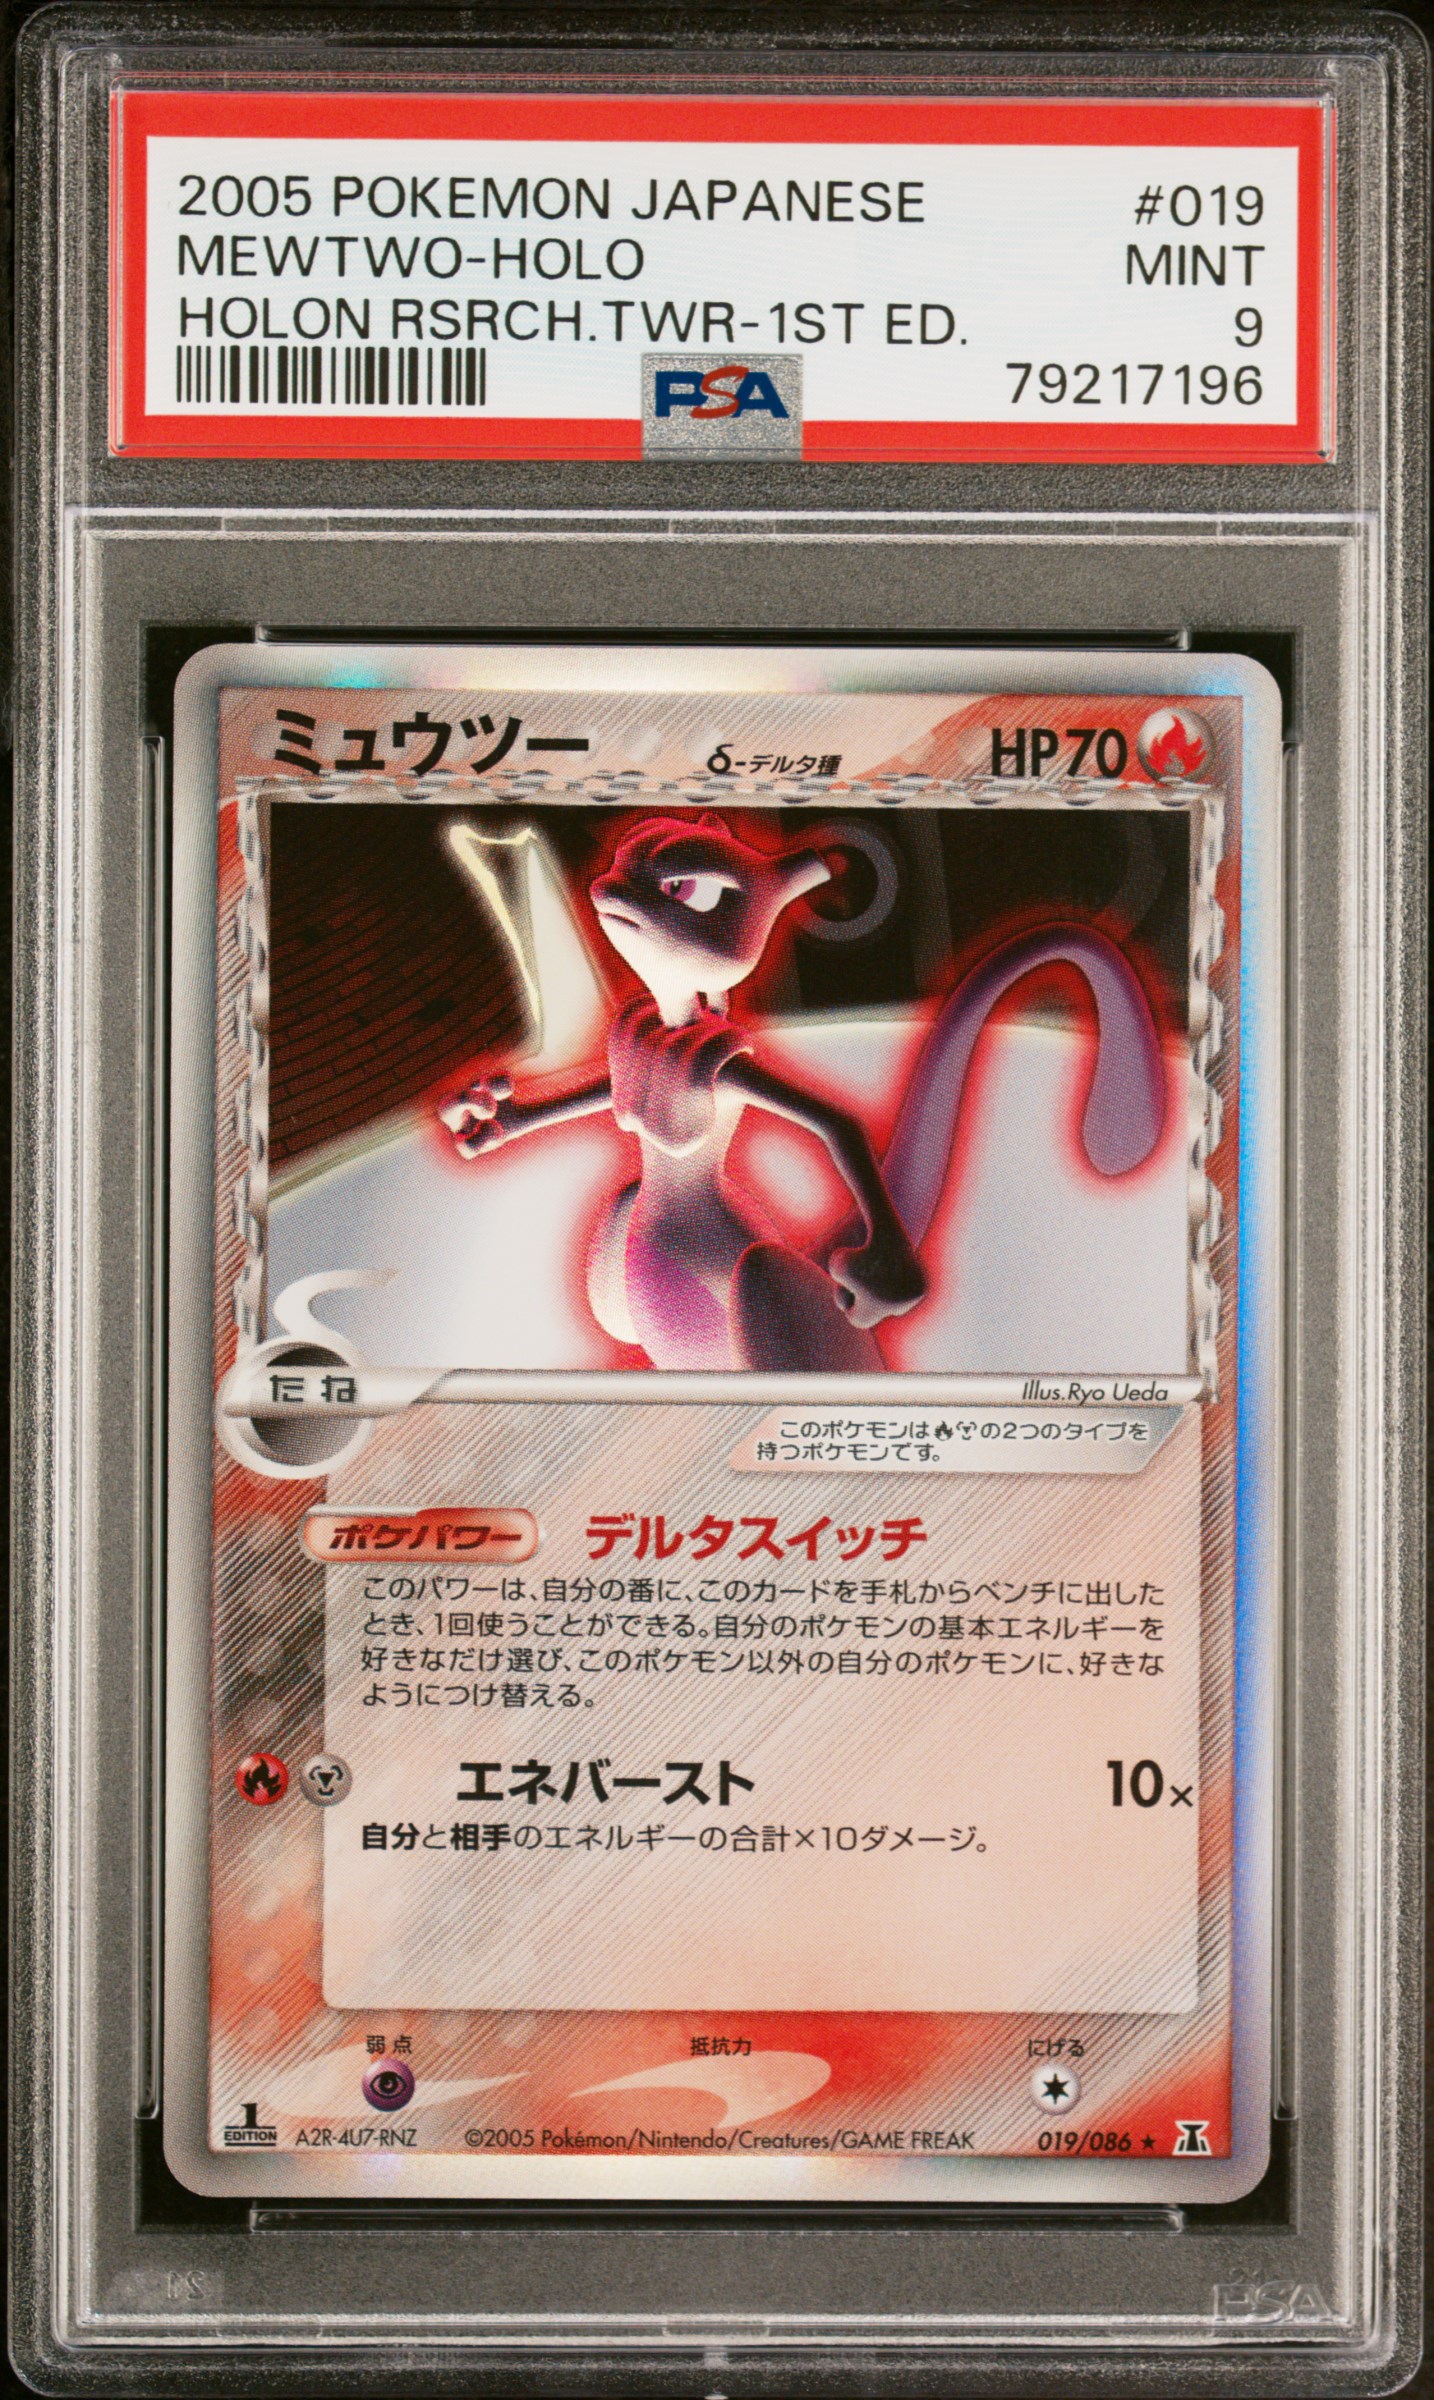 2005 Pokemon Japanese Holon Research Tower 1st Edition #019 Mewtwo-Holo – PSA MINT 9